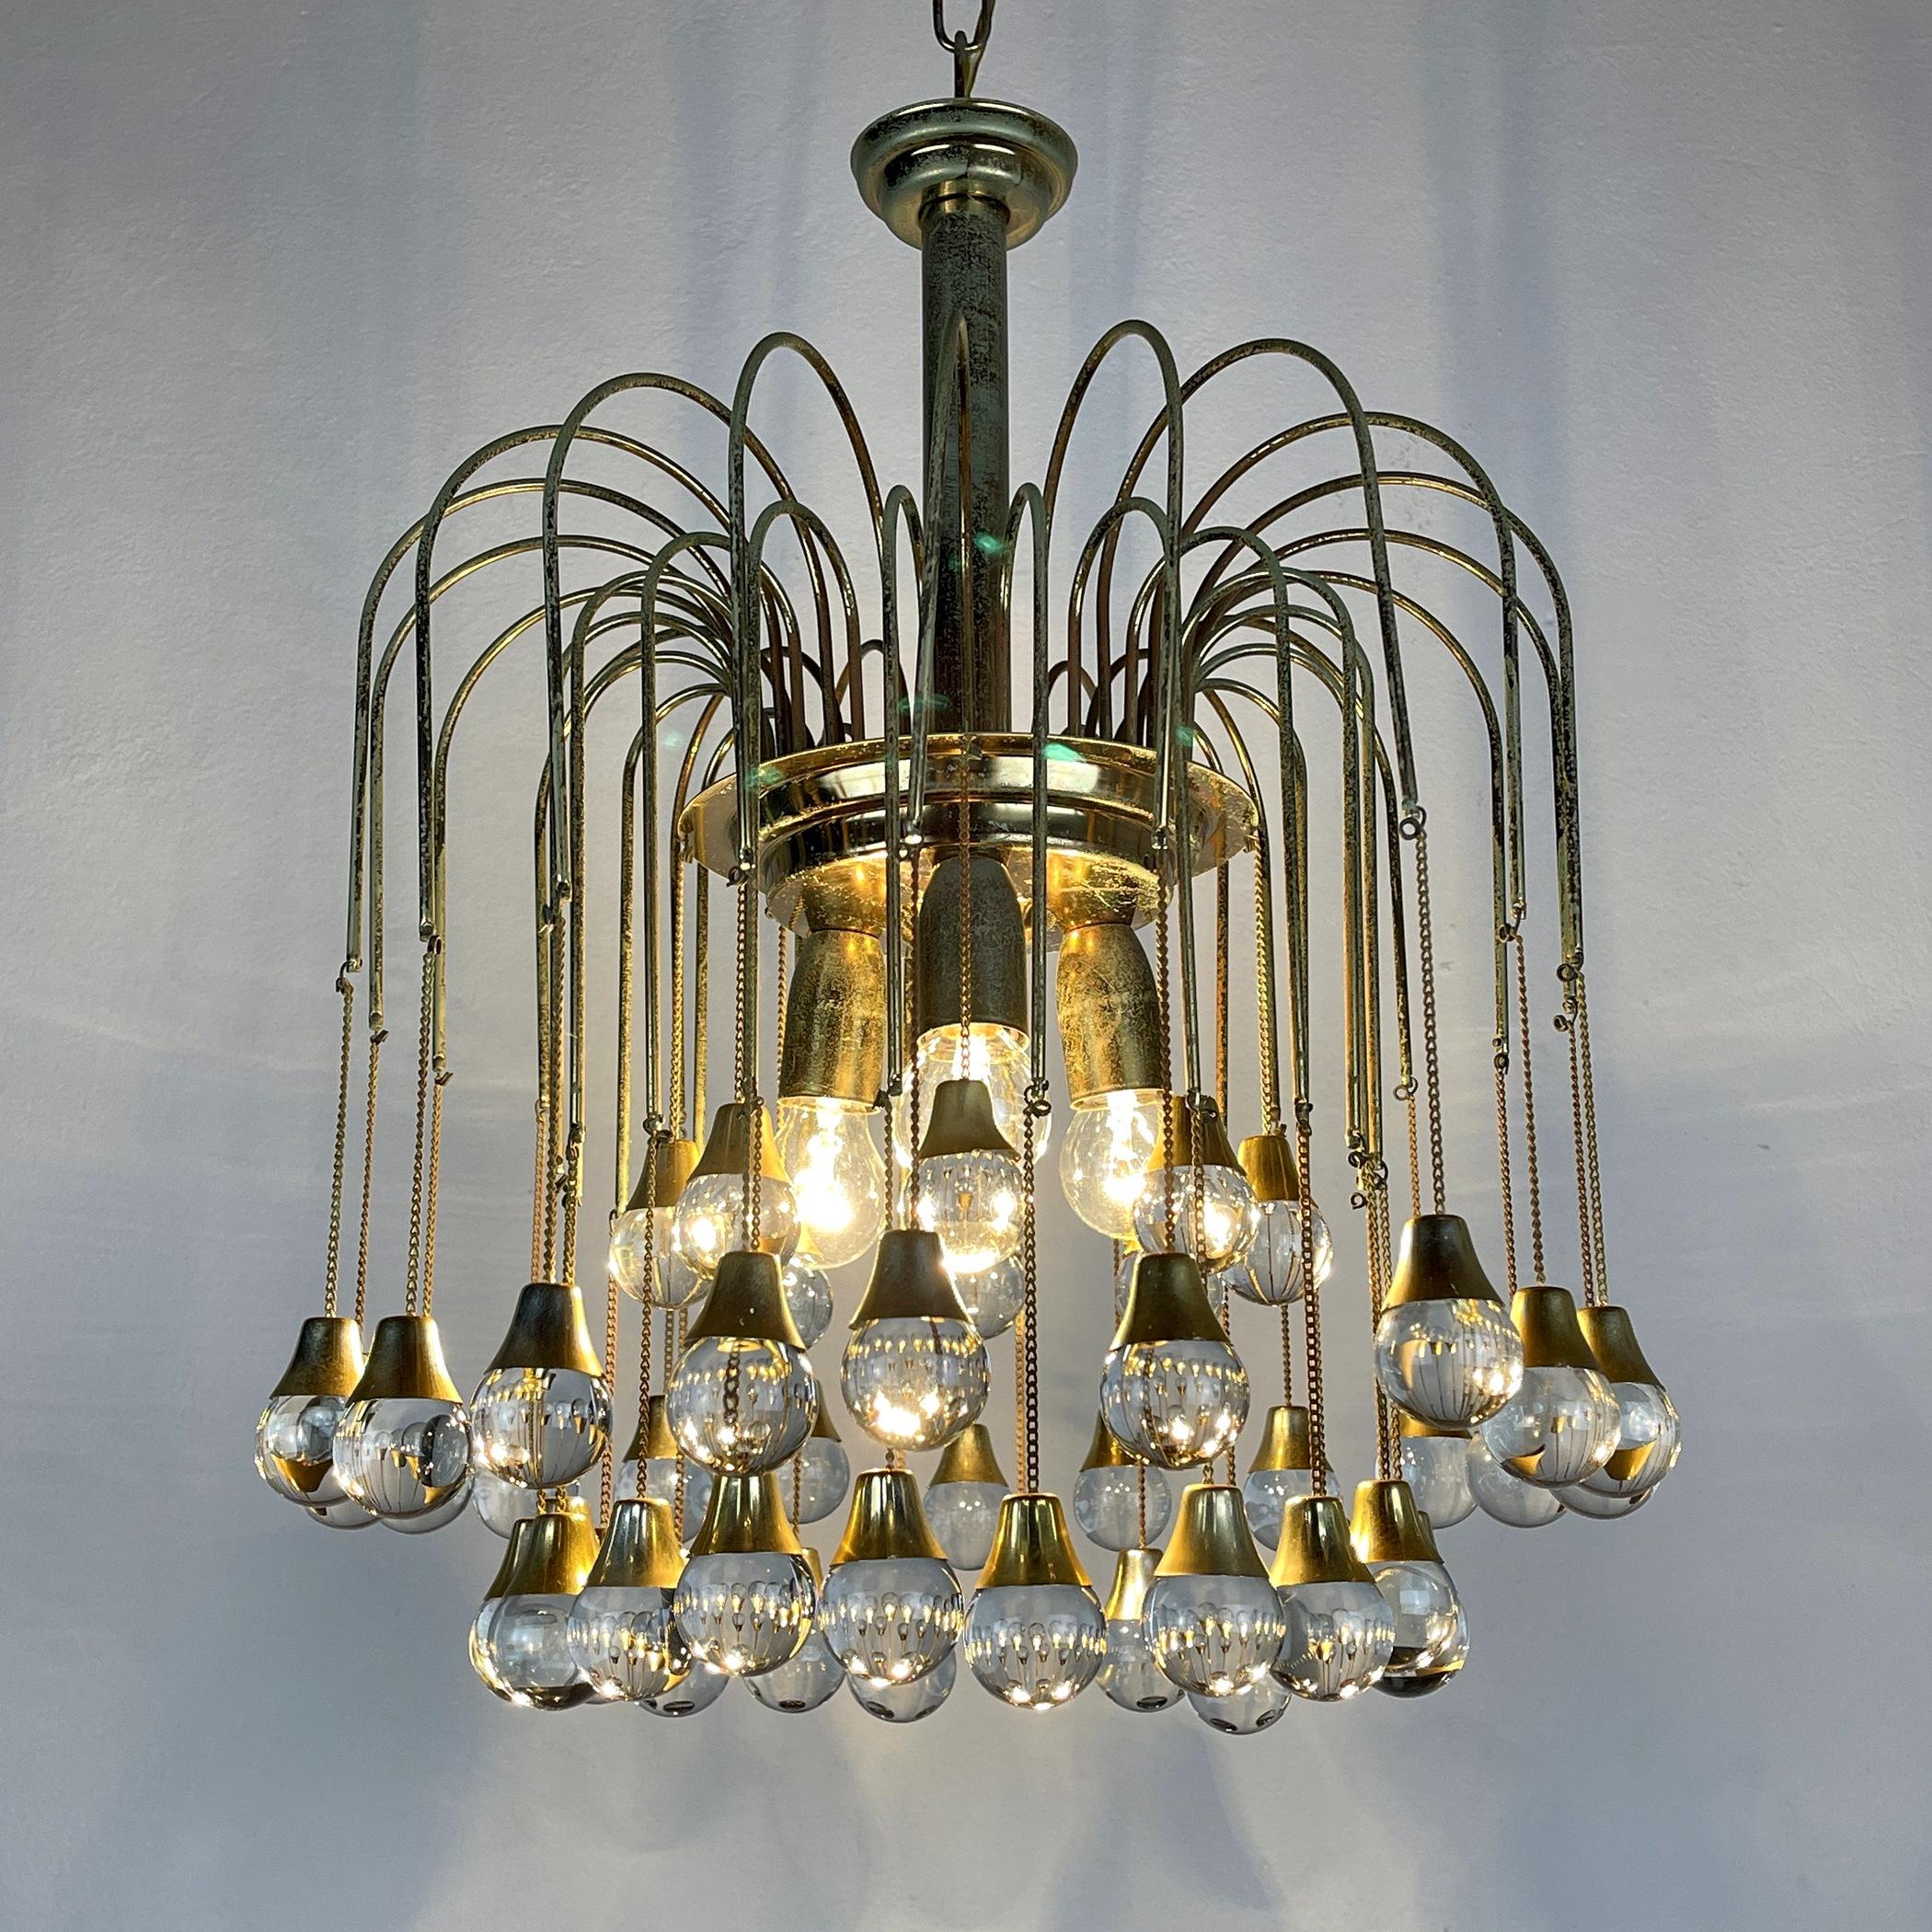 The incredibly beautiful chandelier made in Italy in the 1960s. The base is made of brass, which has acquired a natural patina over time. 48 glass balls. Very good vintage condition. There are minimal signs of wear. The metal has a beautiful natural